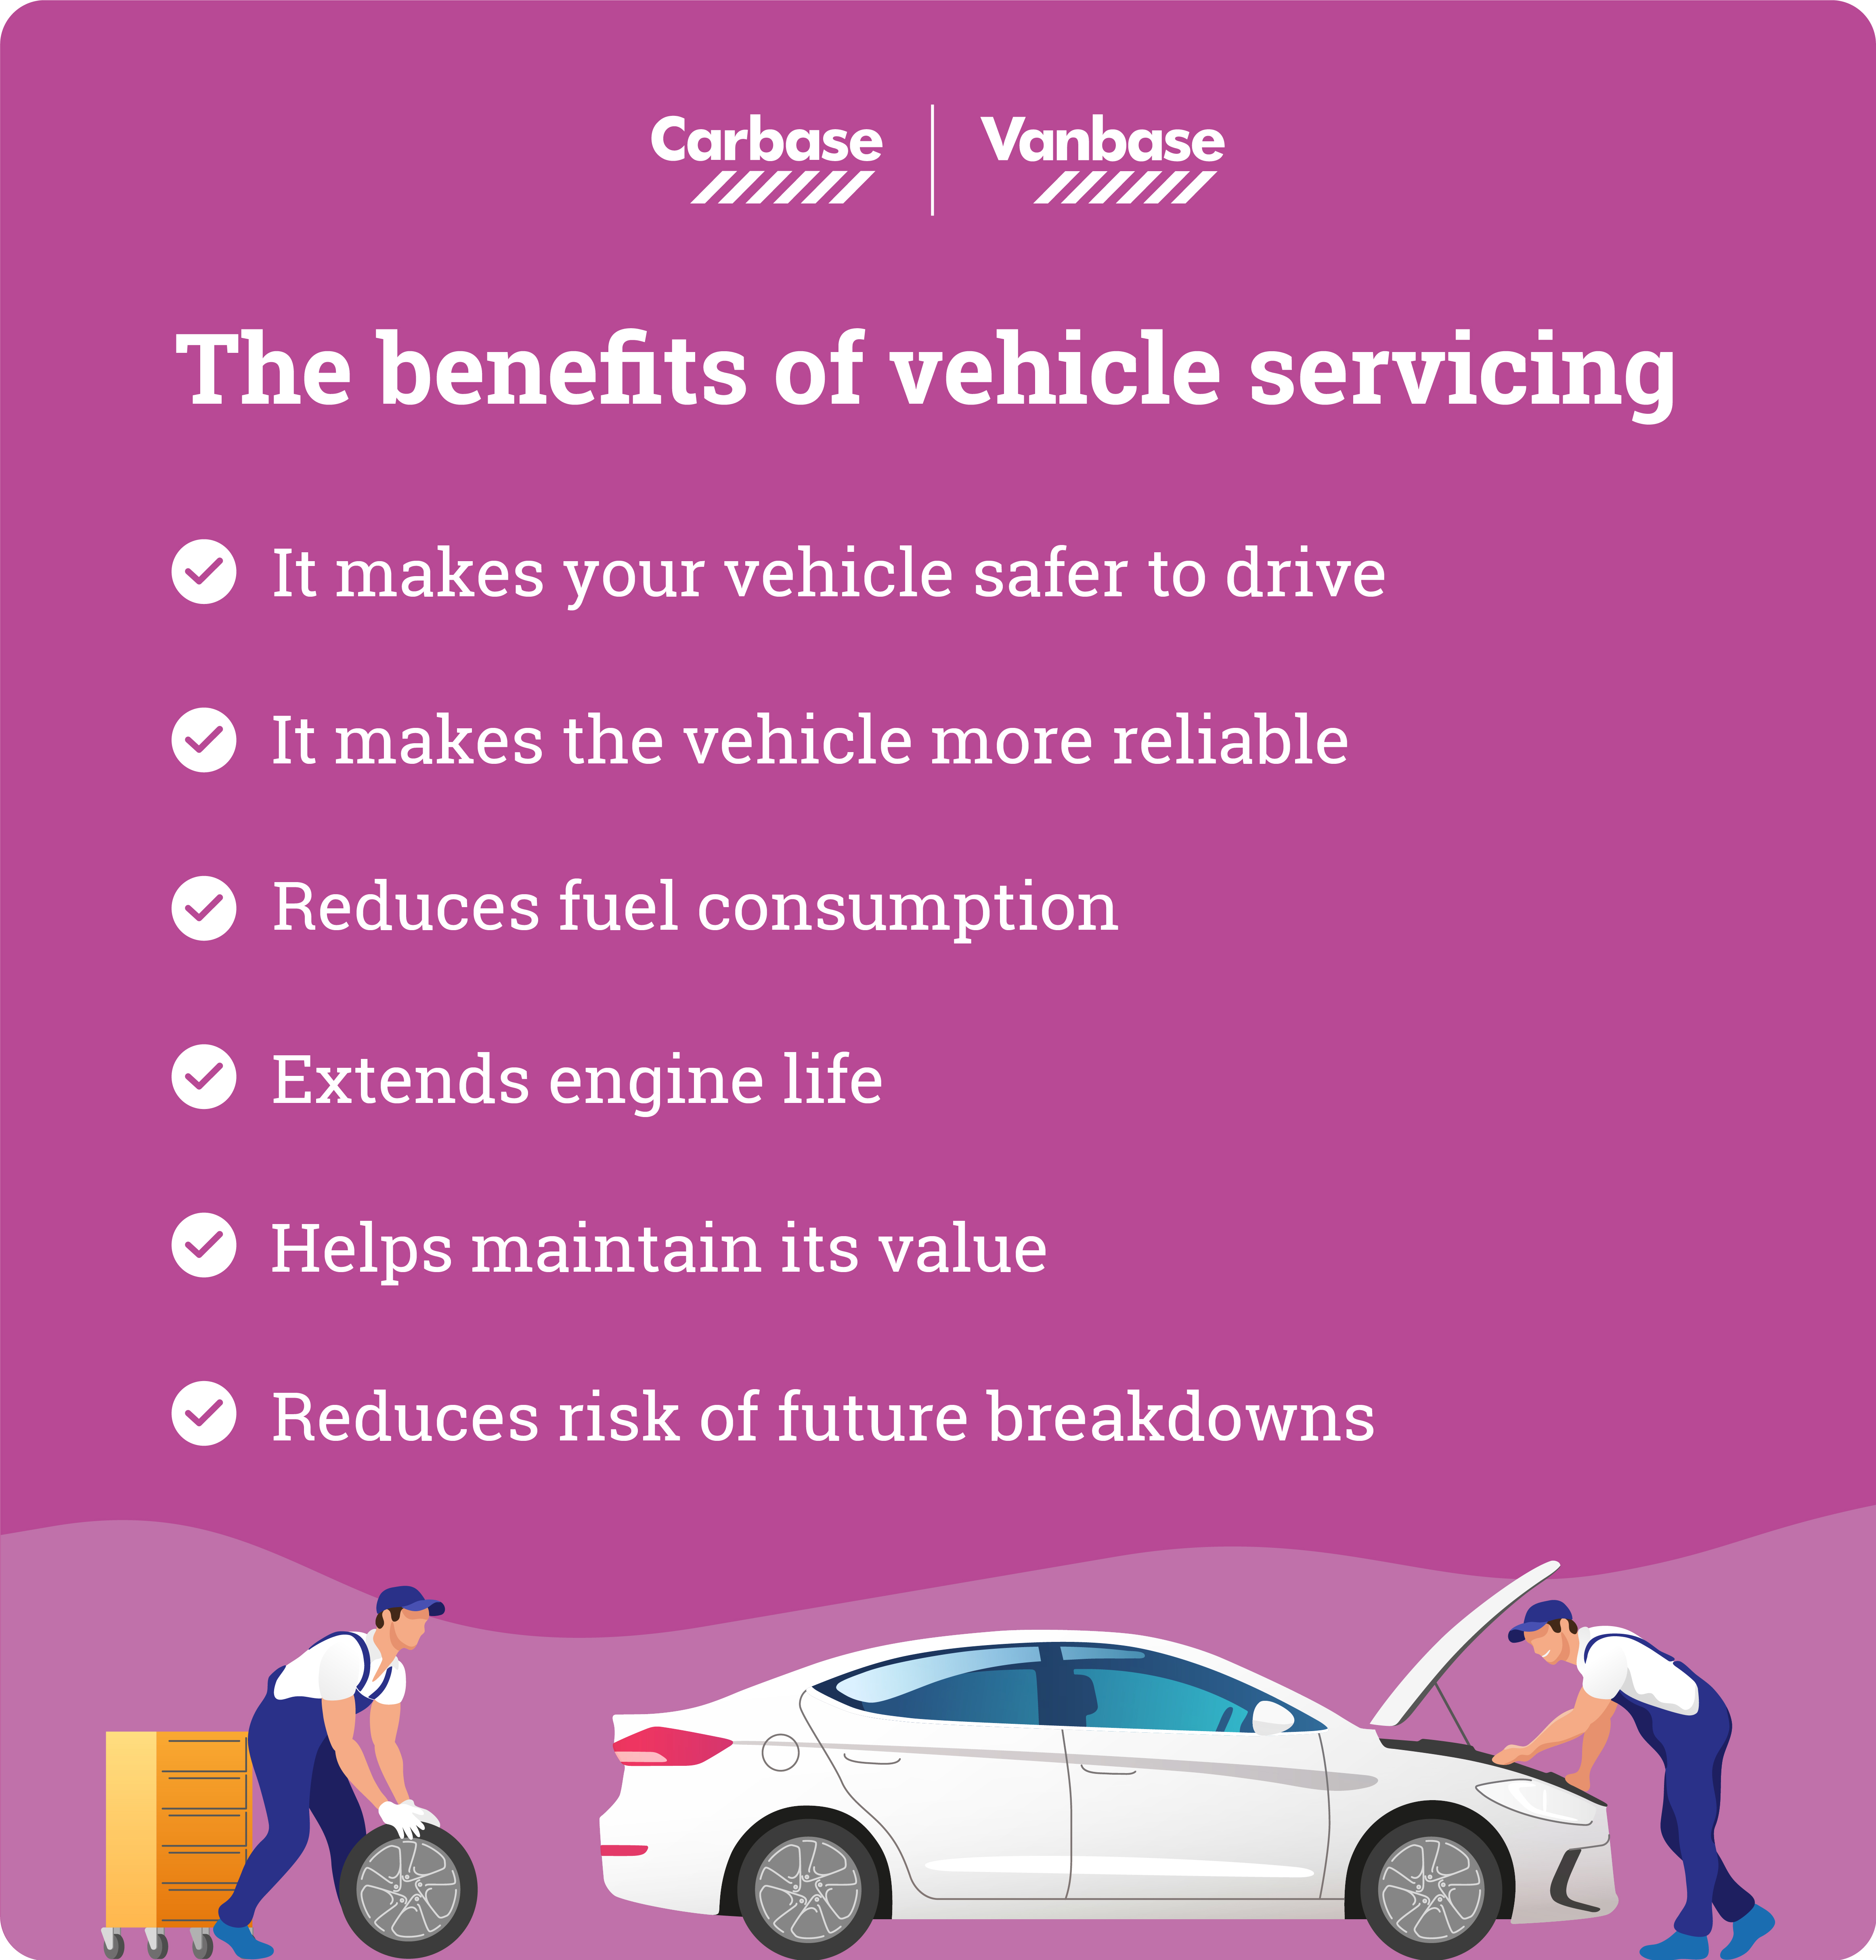 Bullet point list of benefits of vehicle servicing